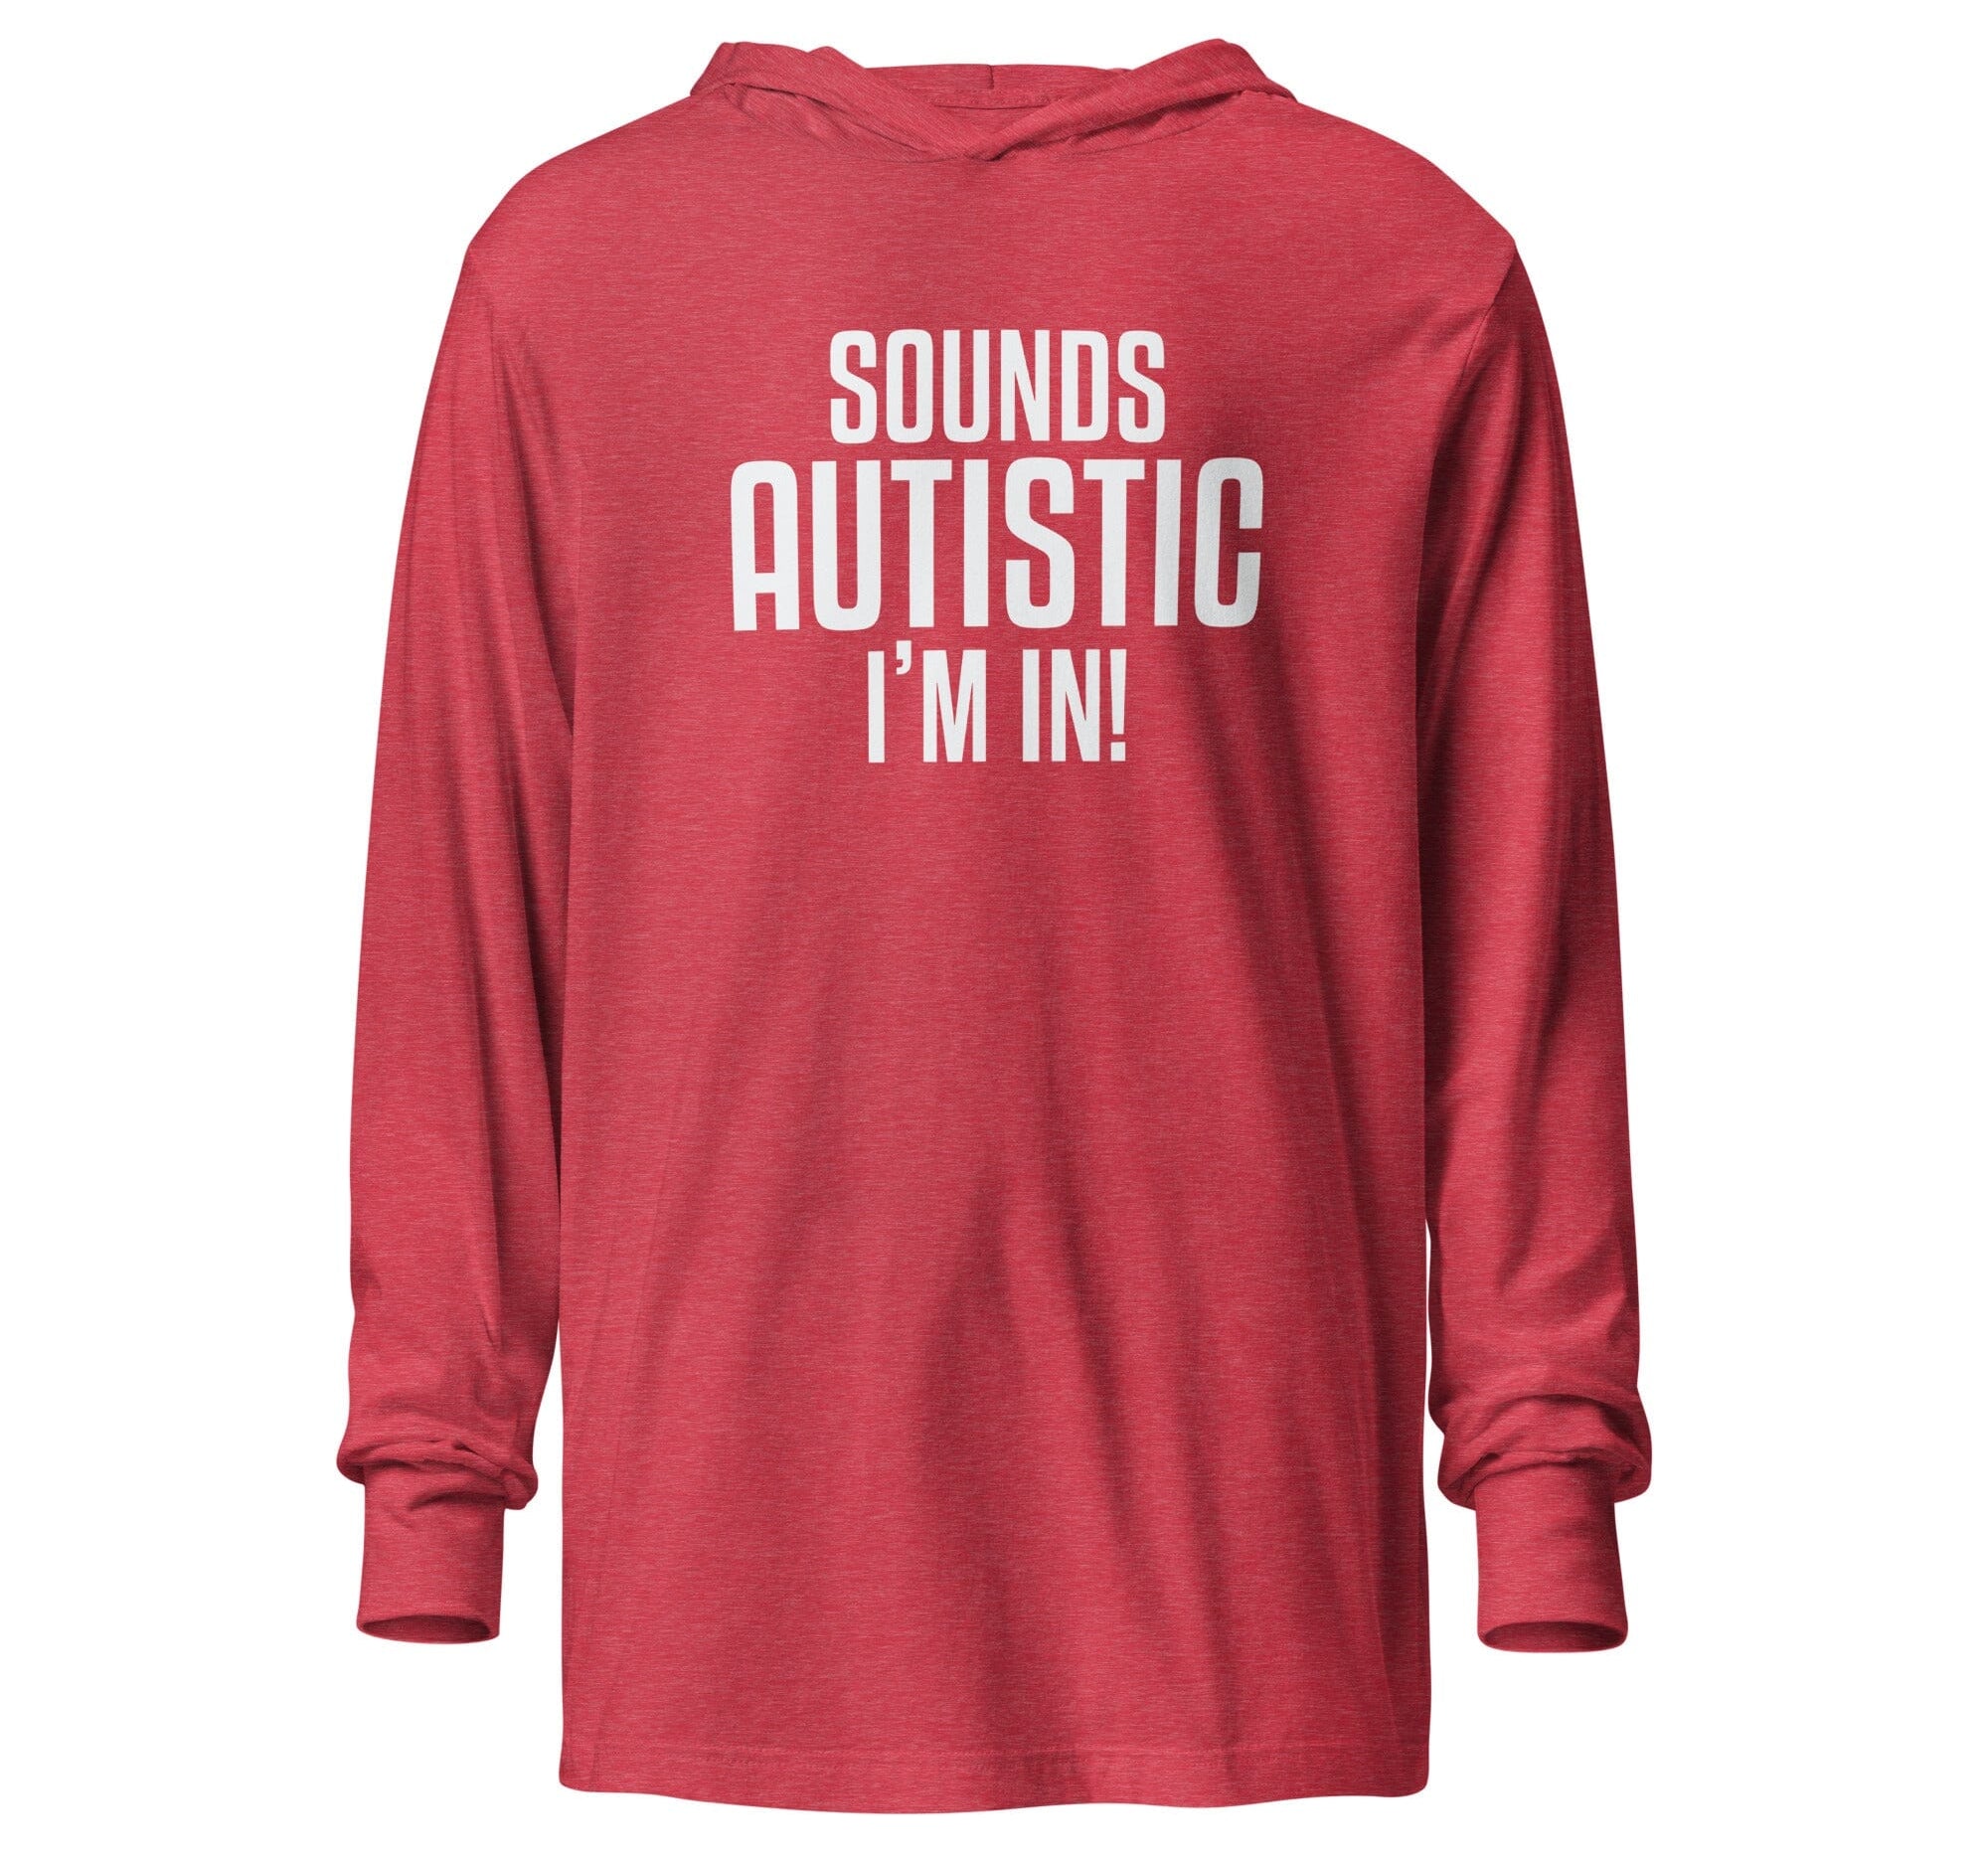 Sounds Autistic I'm In Unisex Hooded long-sleeve tee The Autistic Innovator Heather Red XS 